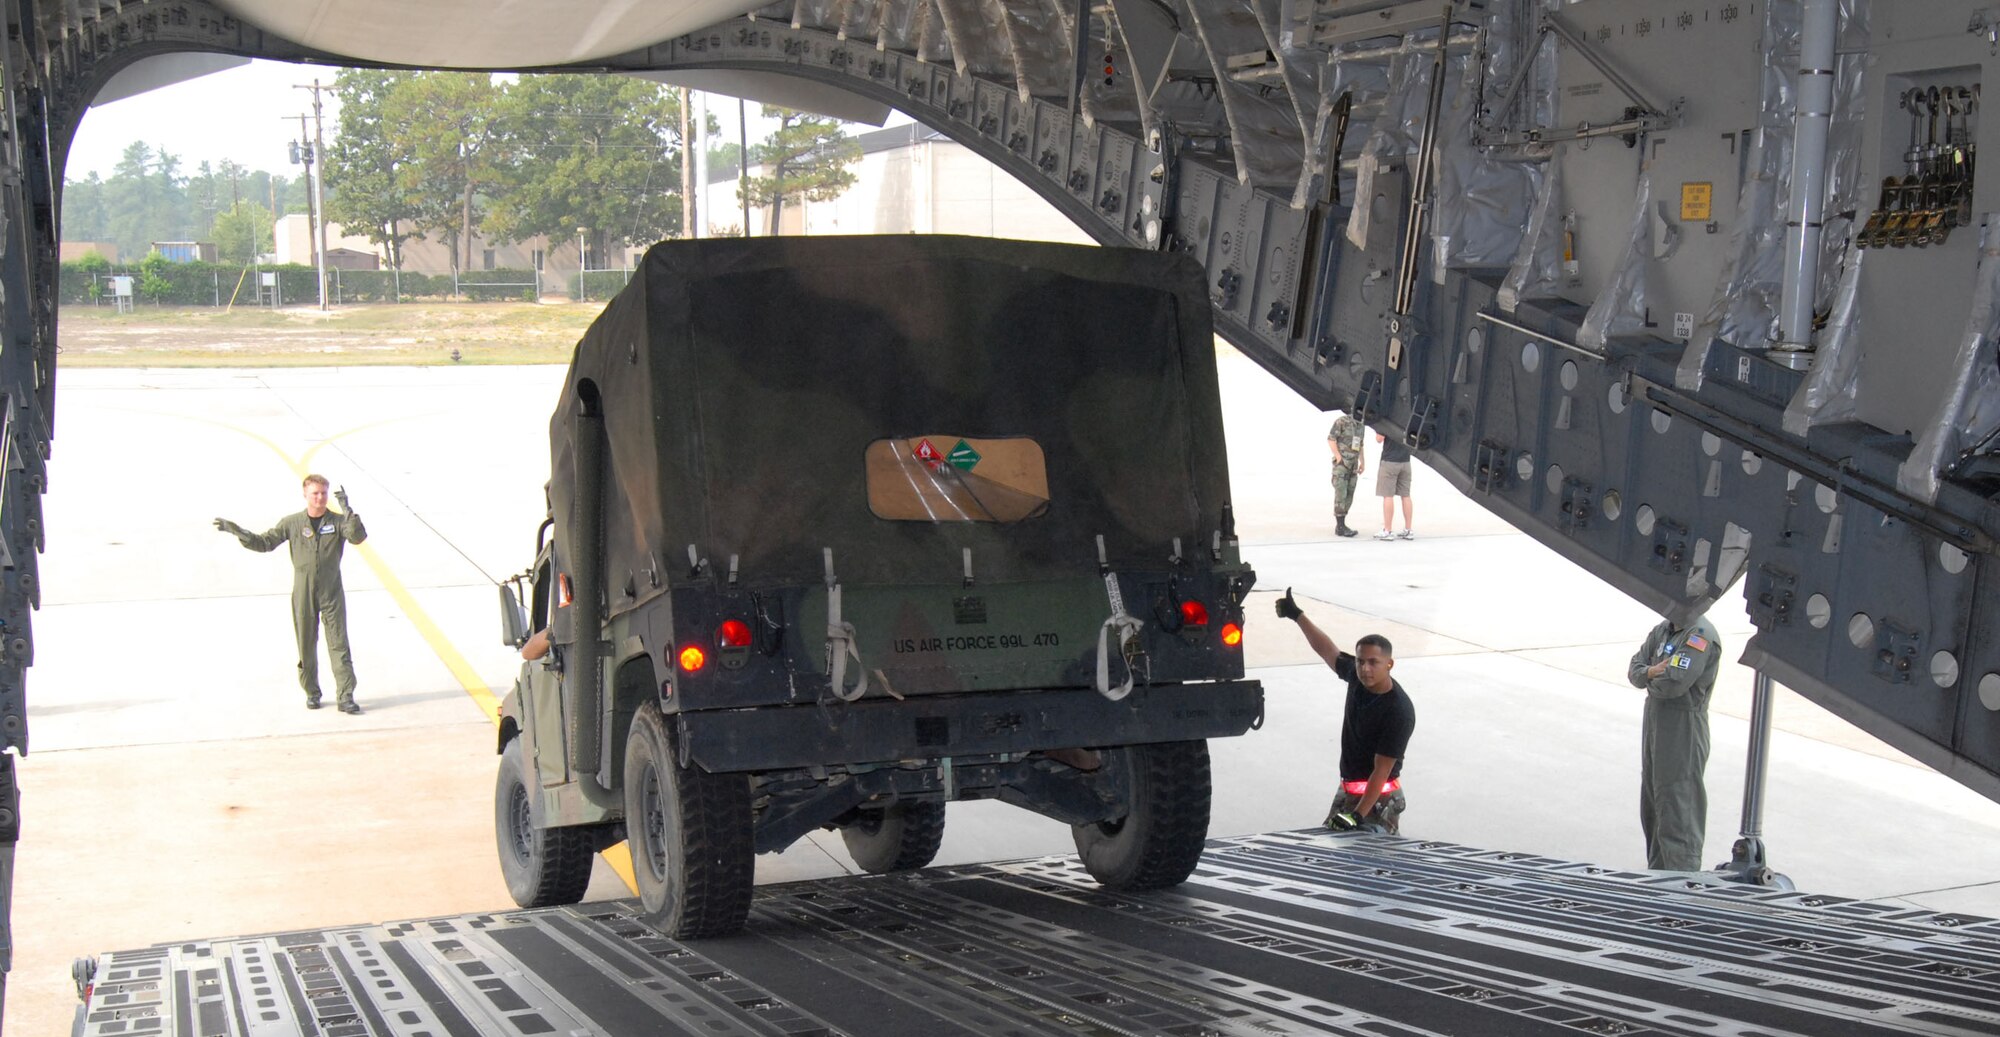 Flight and ground crewmembers work together to load a Humvee onto a C-17 Globemaster III at Pope Air Force Base, N.C., Aug. 19. The vehicle and approximately 40 members of Pope AFB's 43rd Aeromedical Evacuation Squadron deployed to set up a Mobile Aeromedical Staging Facility in Brownsville, Texas, in preparation for the approach of Hurricane Dean. (U.S. Air Force photo/Ed Drohan)